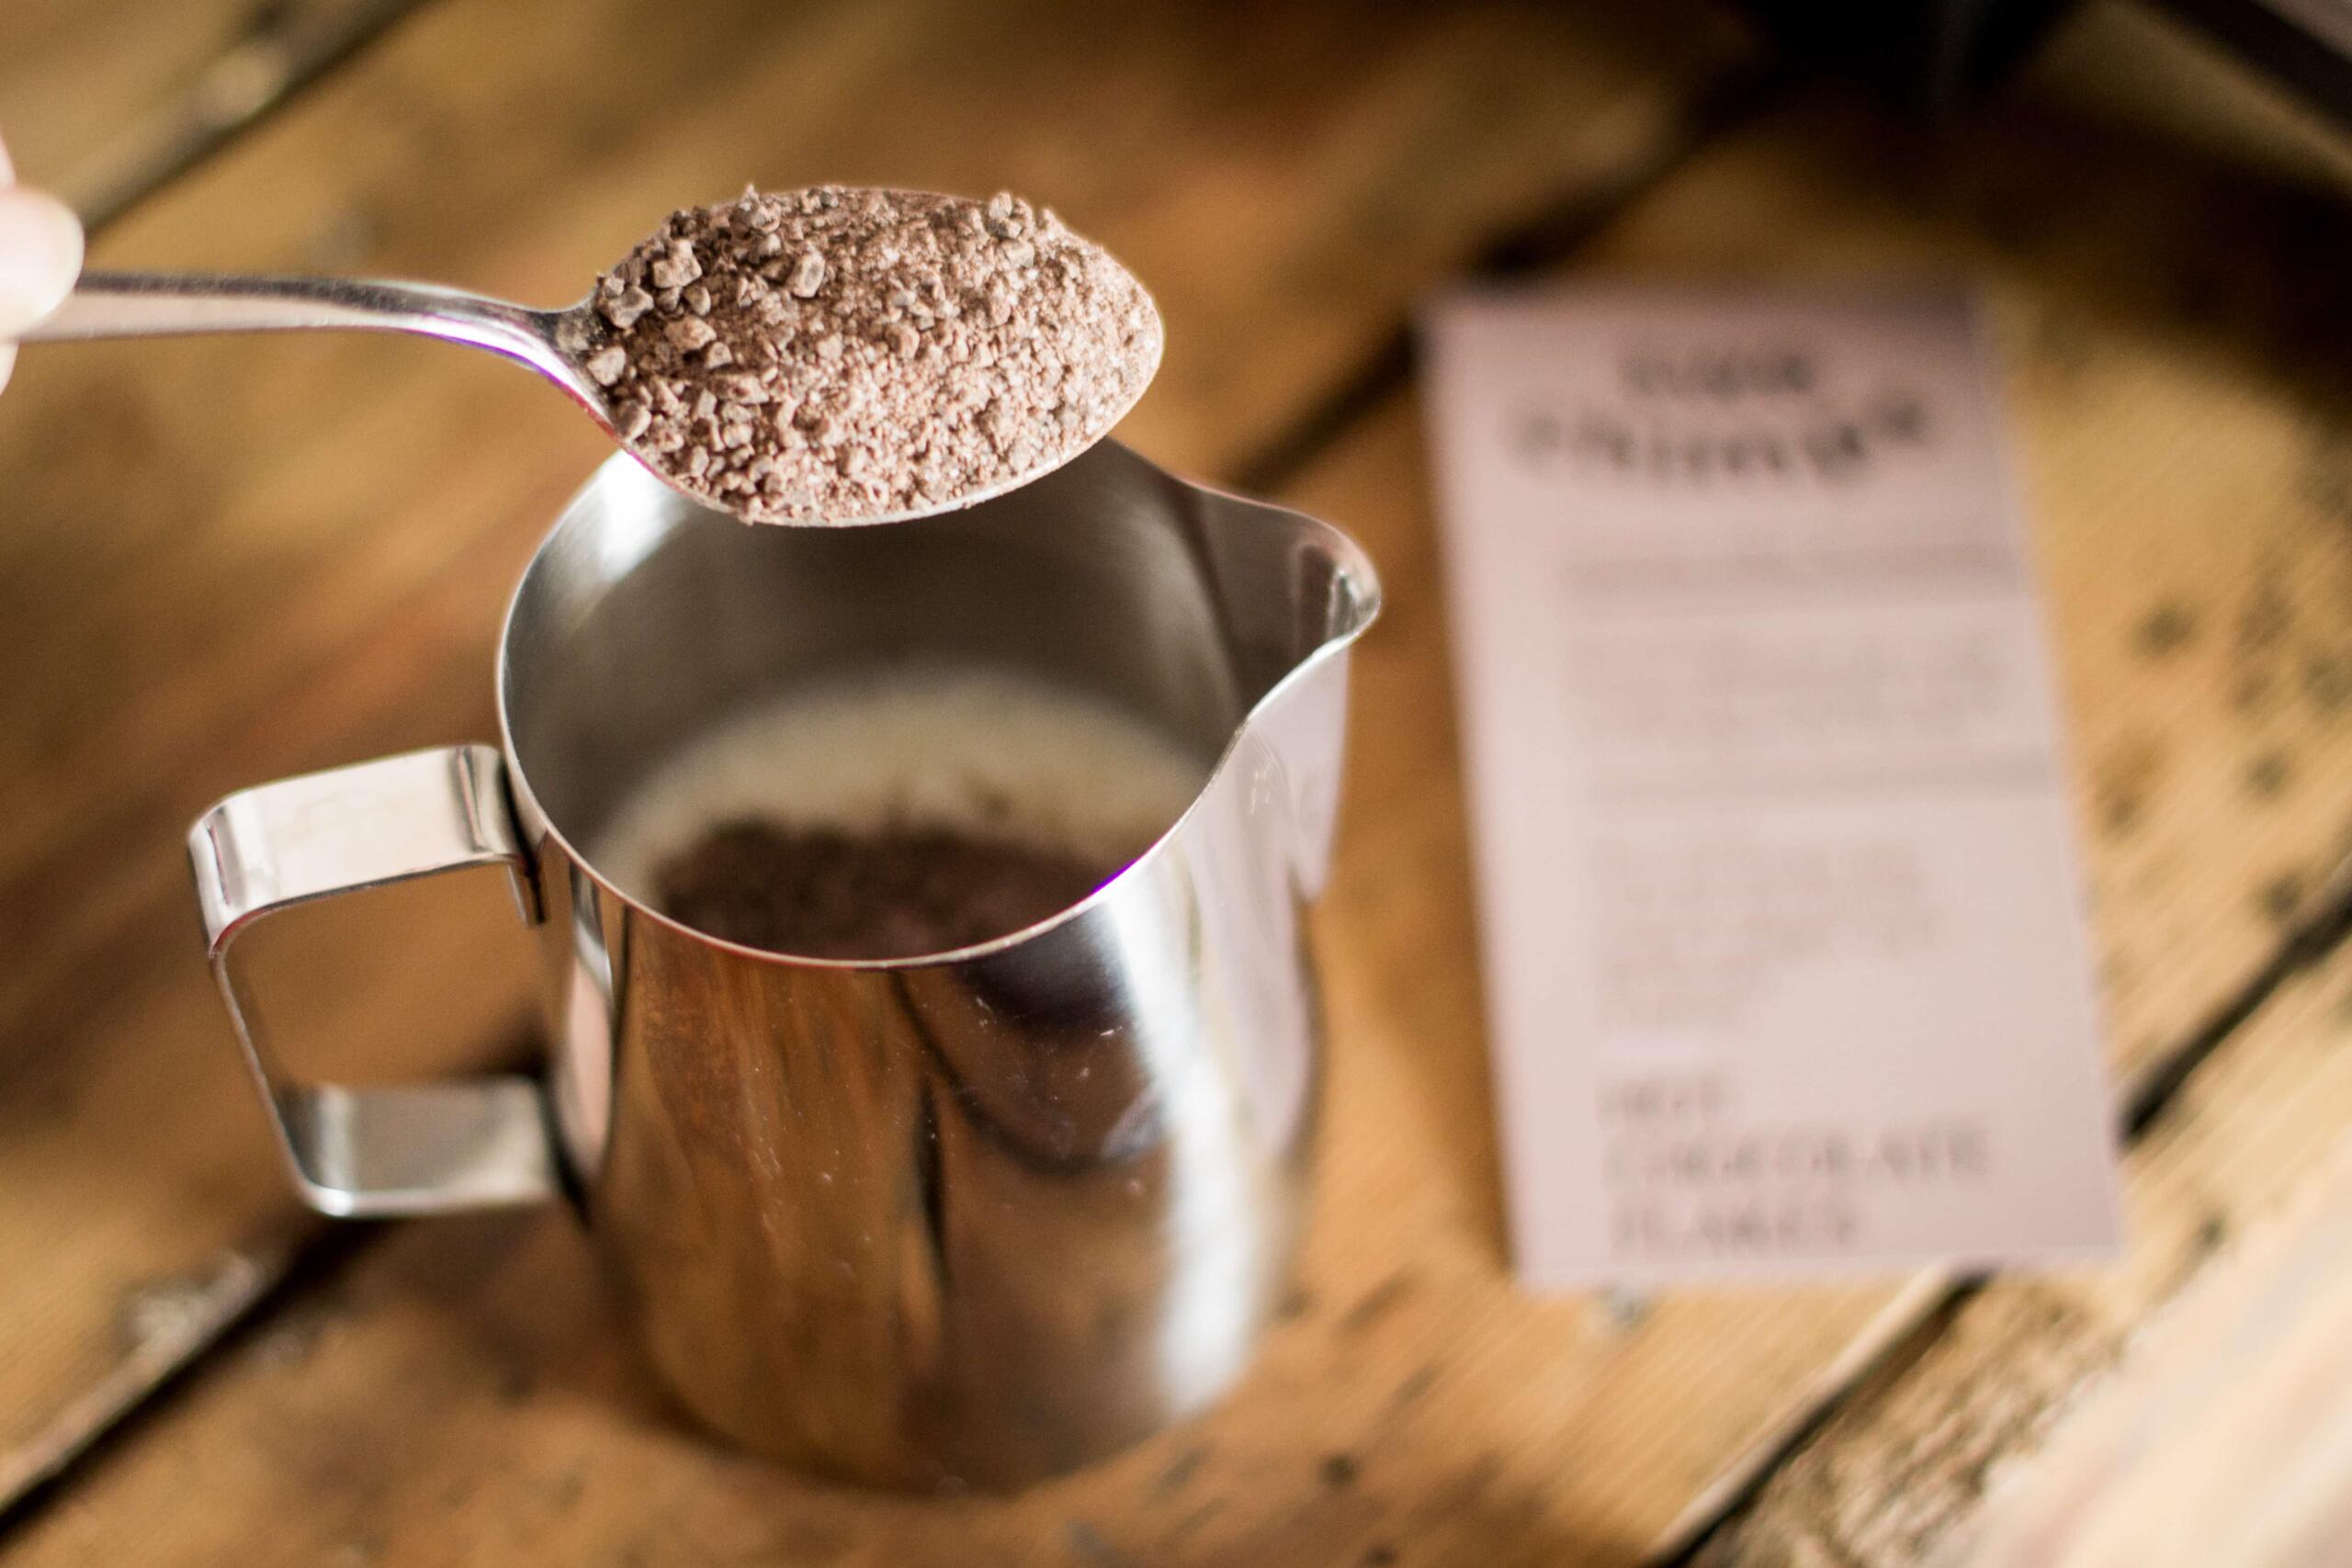 spoon full of hot chocolate flakes over a metal jug of milk